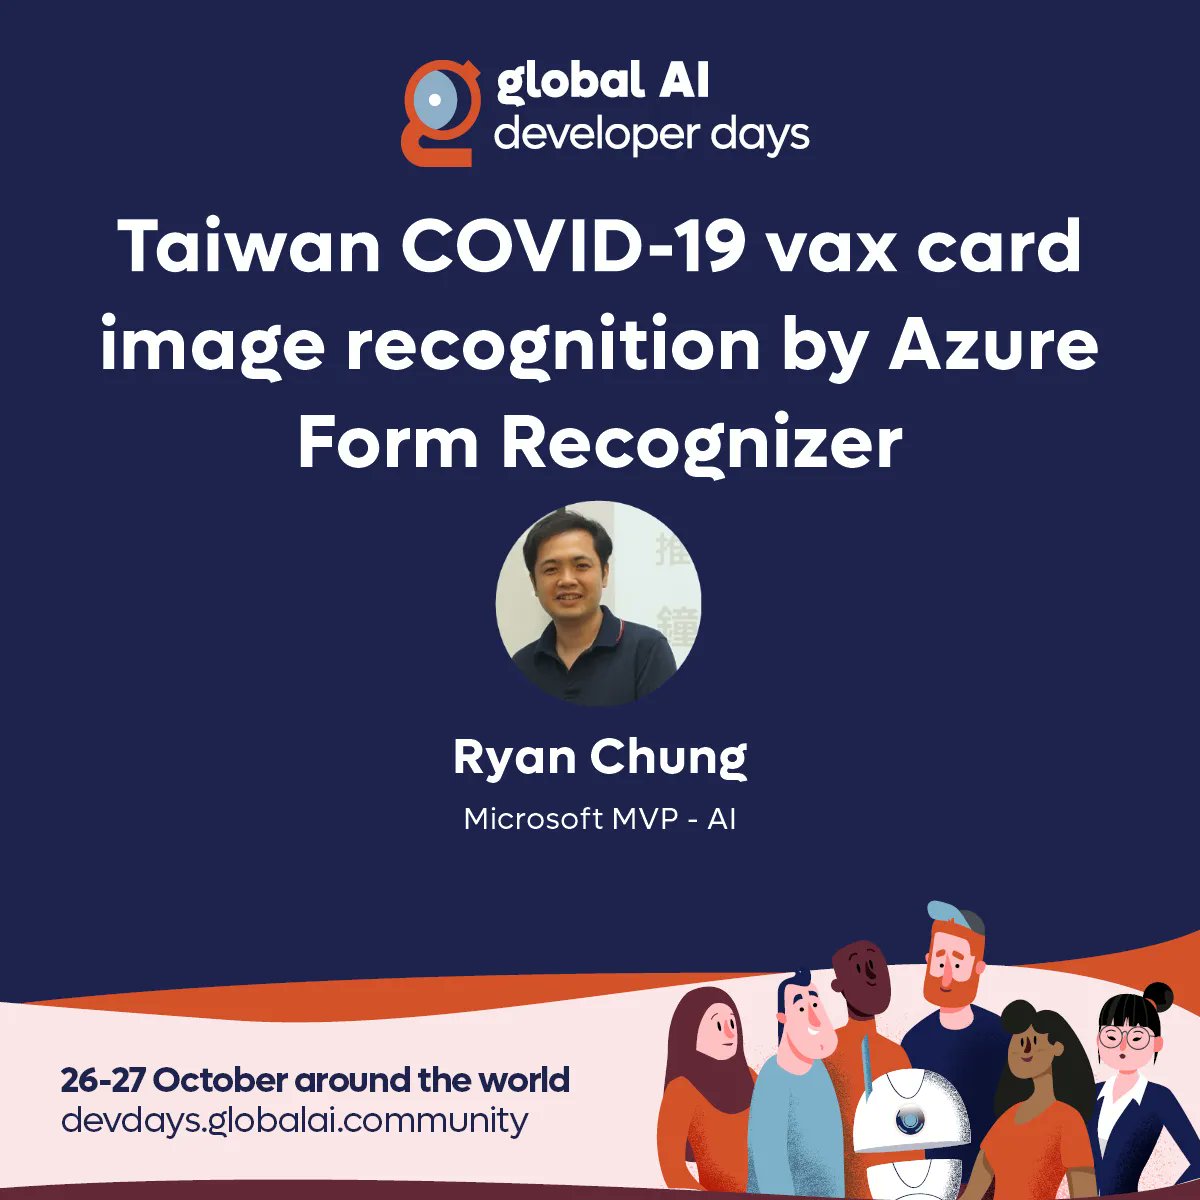 Join the #GlobalAIDeveloperDays this October for the #Hybrid #AI #Community event of the year! 📅 27 October | 04:30 UTC 🤩 Ryan Chung () 📢 Taiwan COVID-19 vax card image recognition by Azure Form Recognizer Register now on: buff.ly/3Sm5cgG